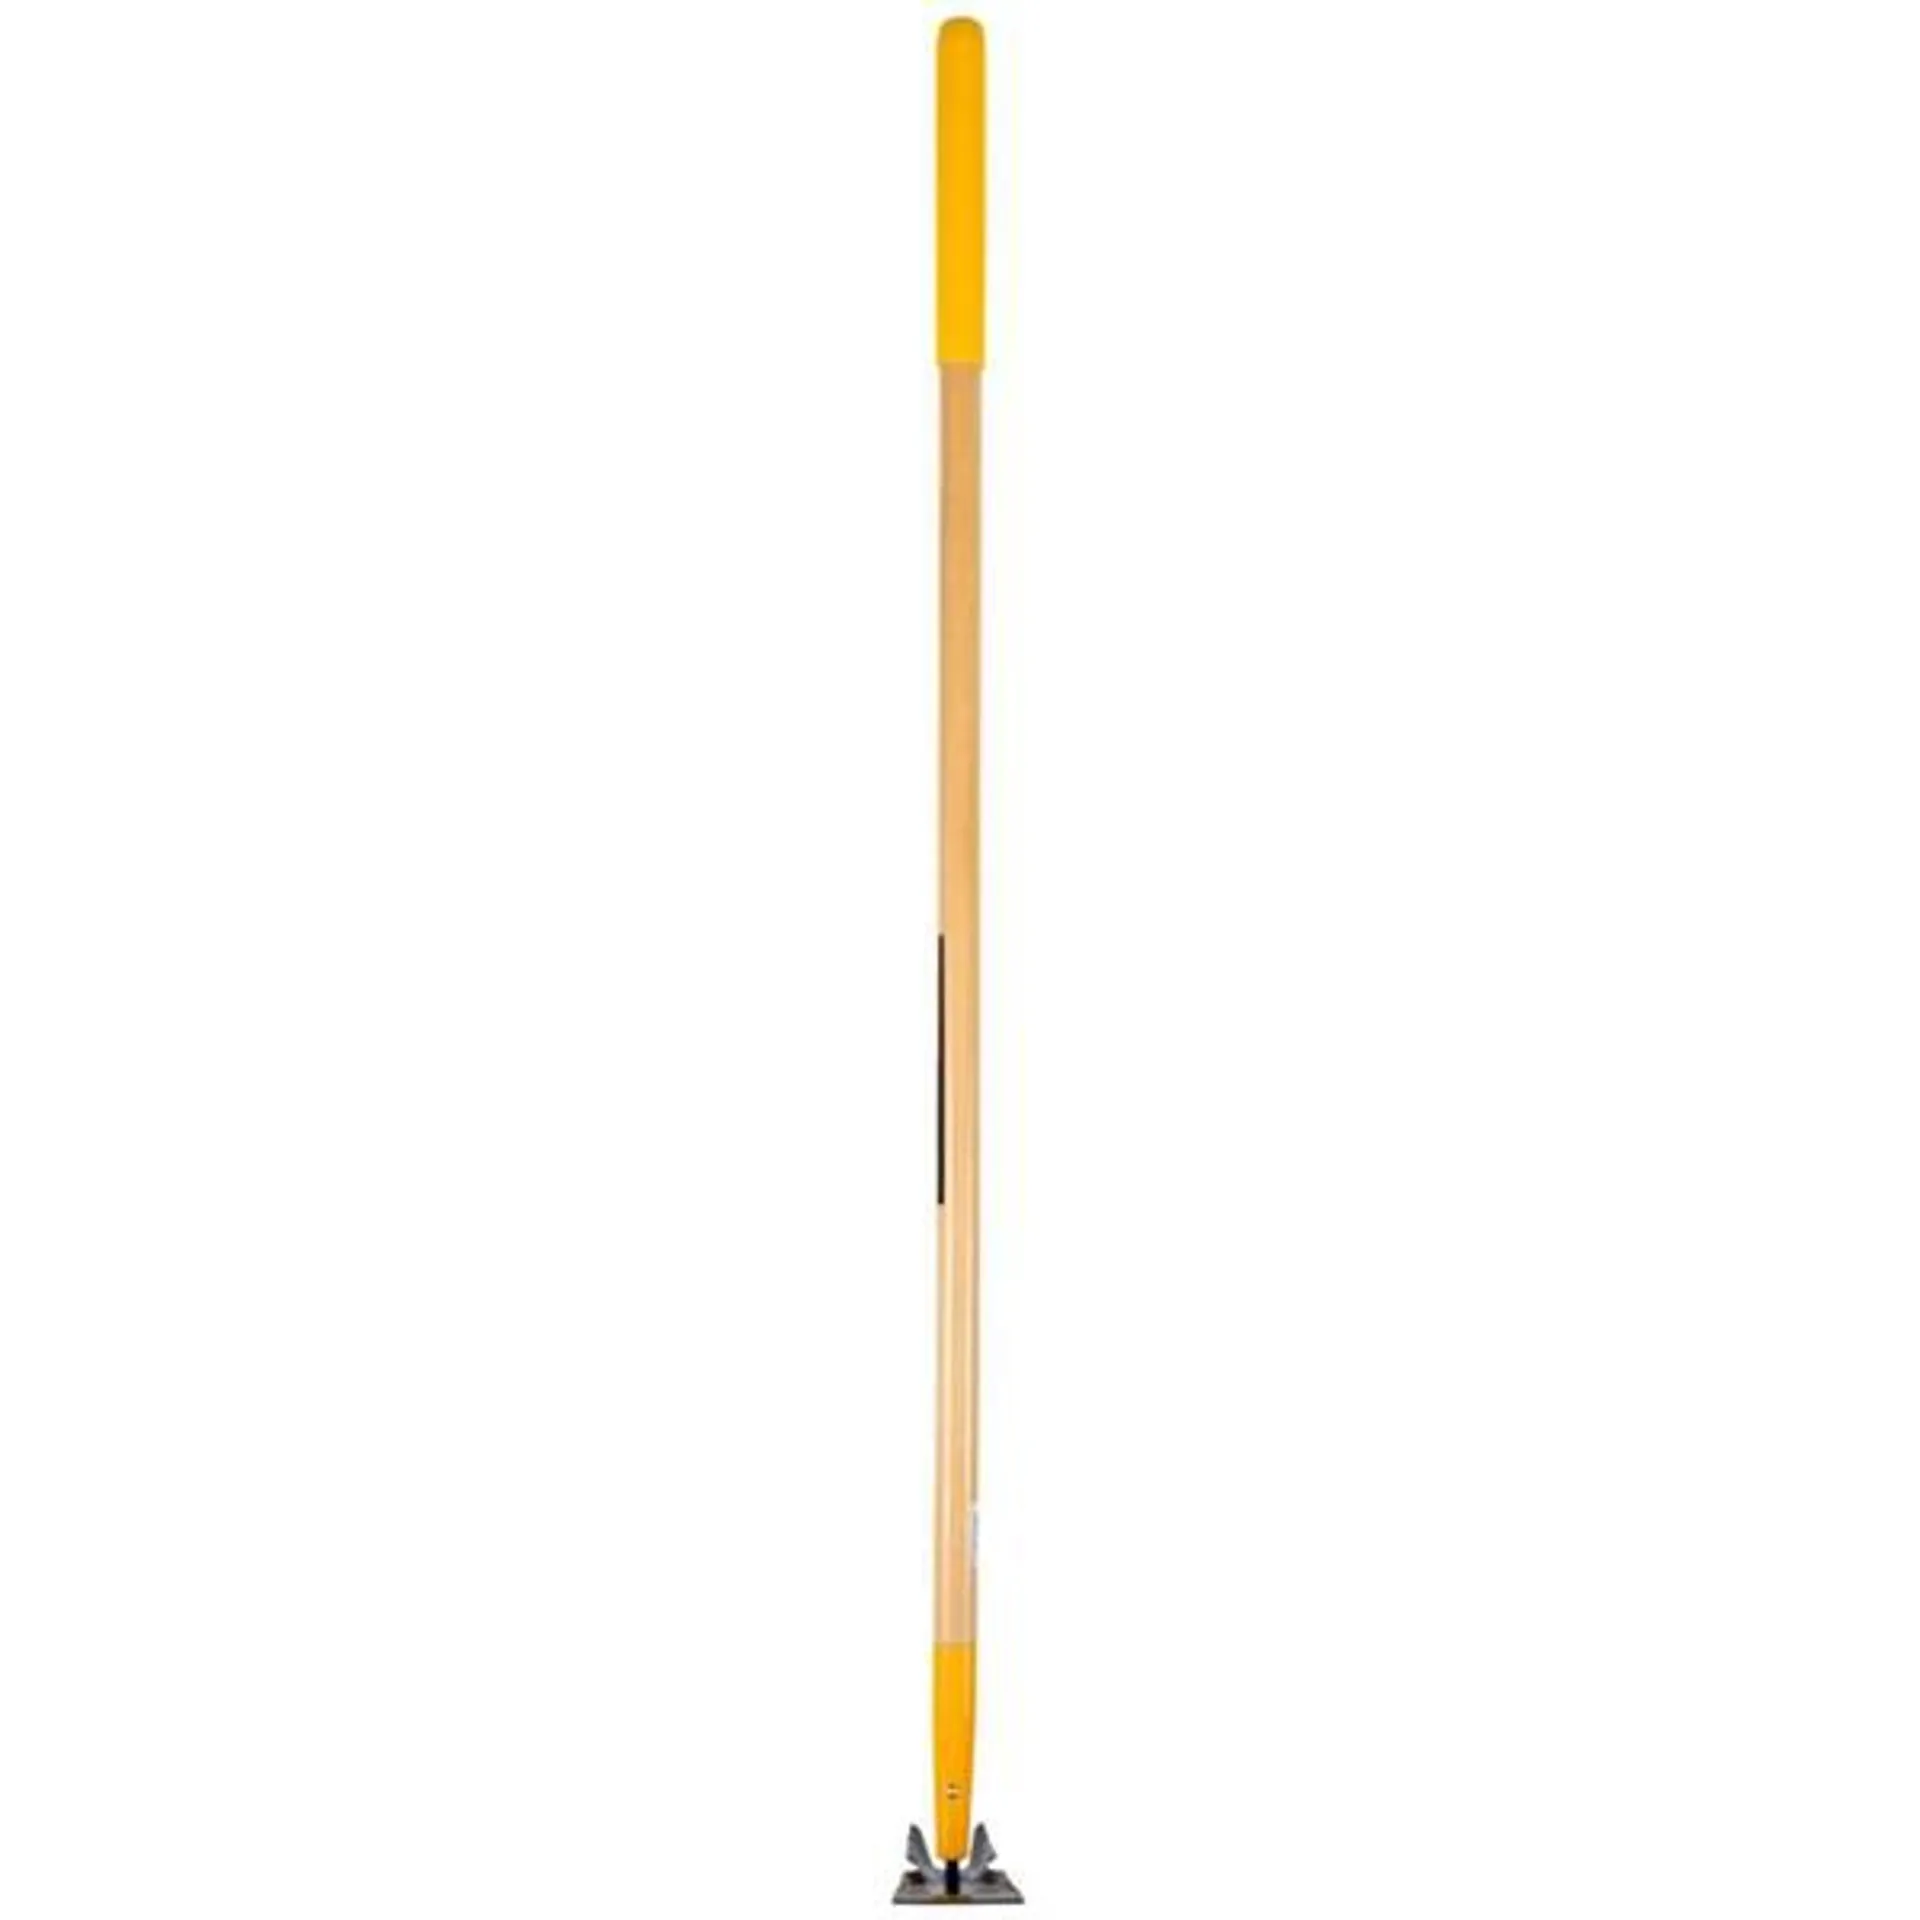 Long Wood Handle Draw Hoe / Cultivator